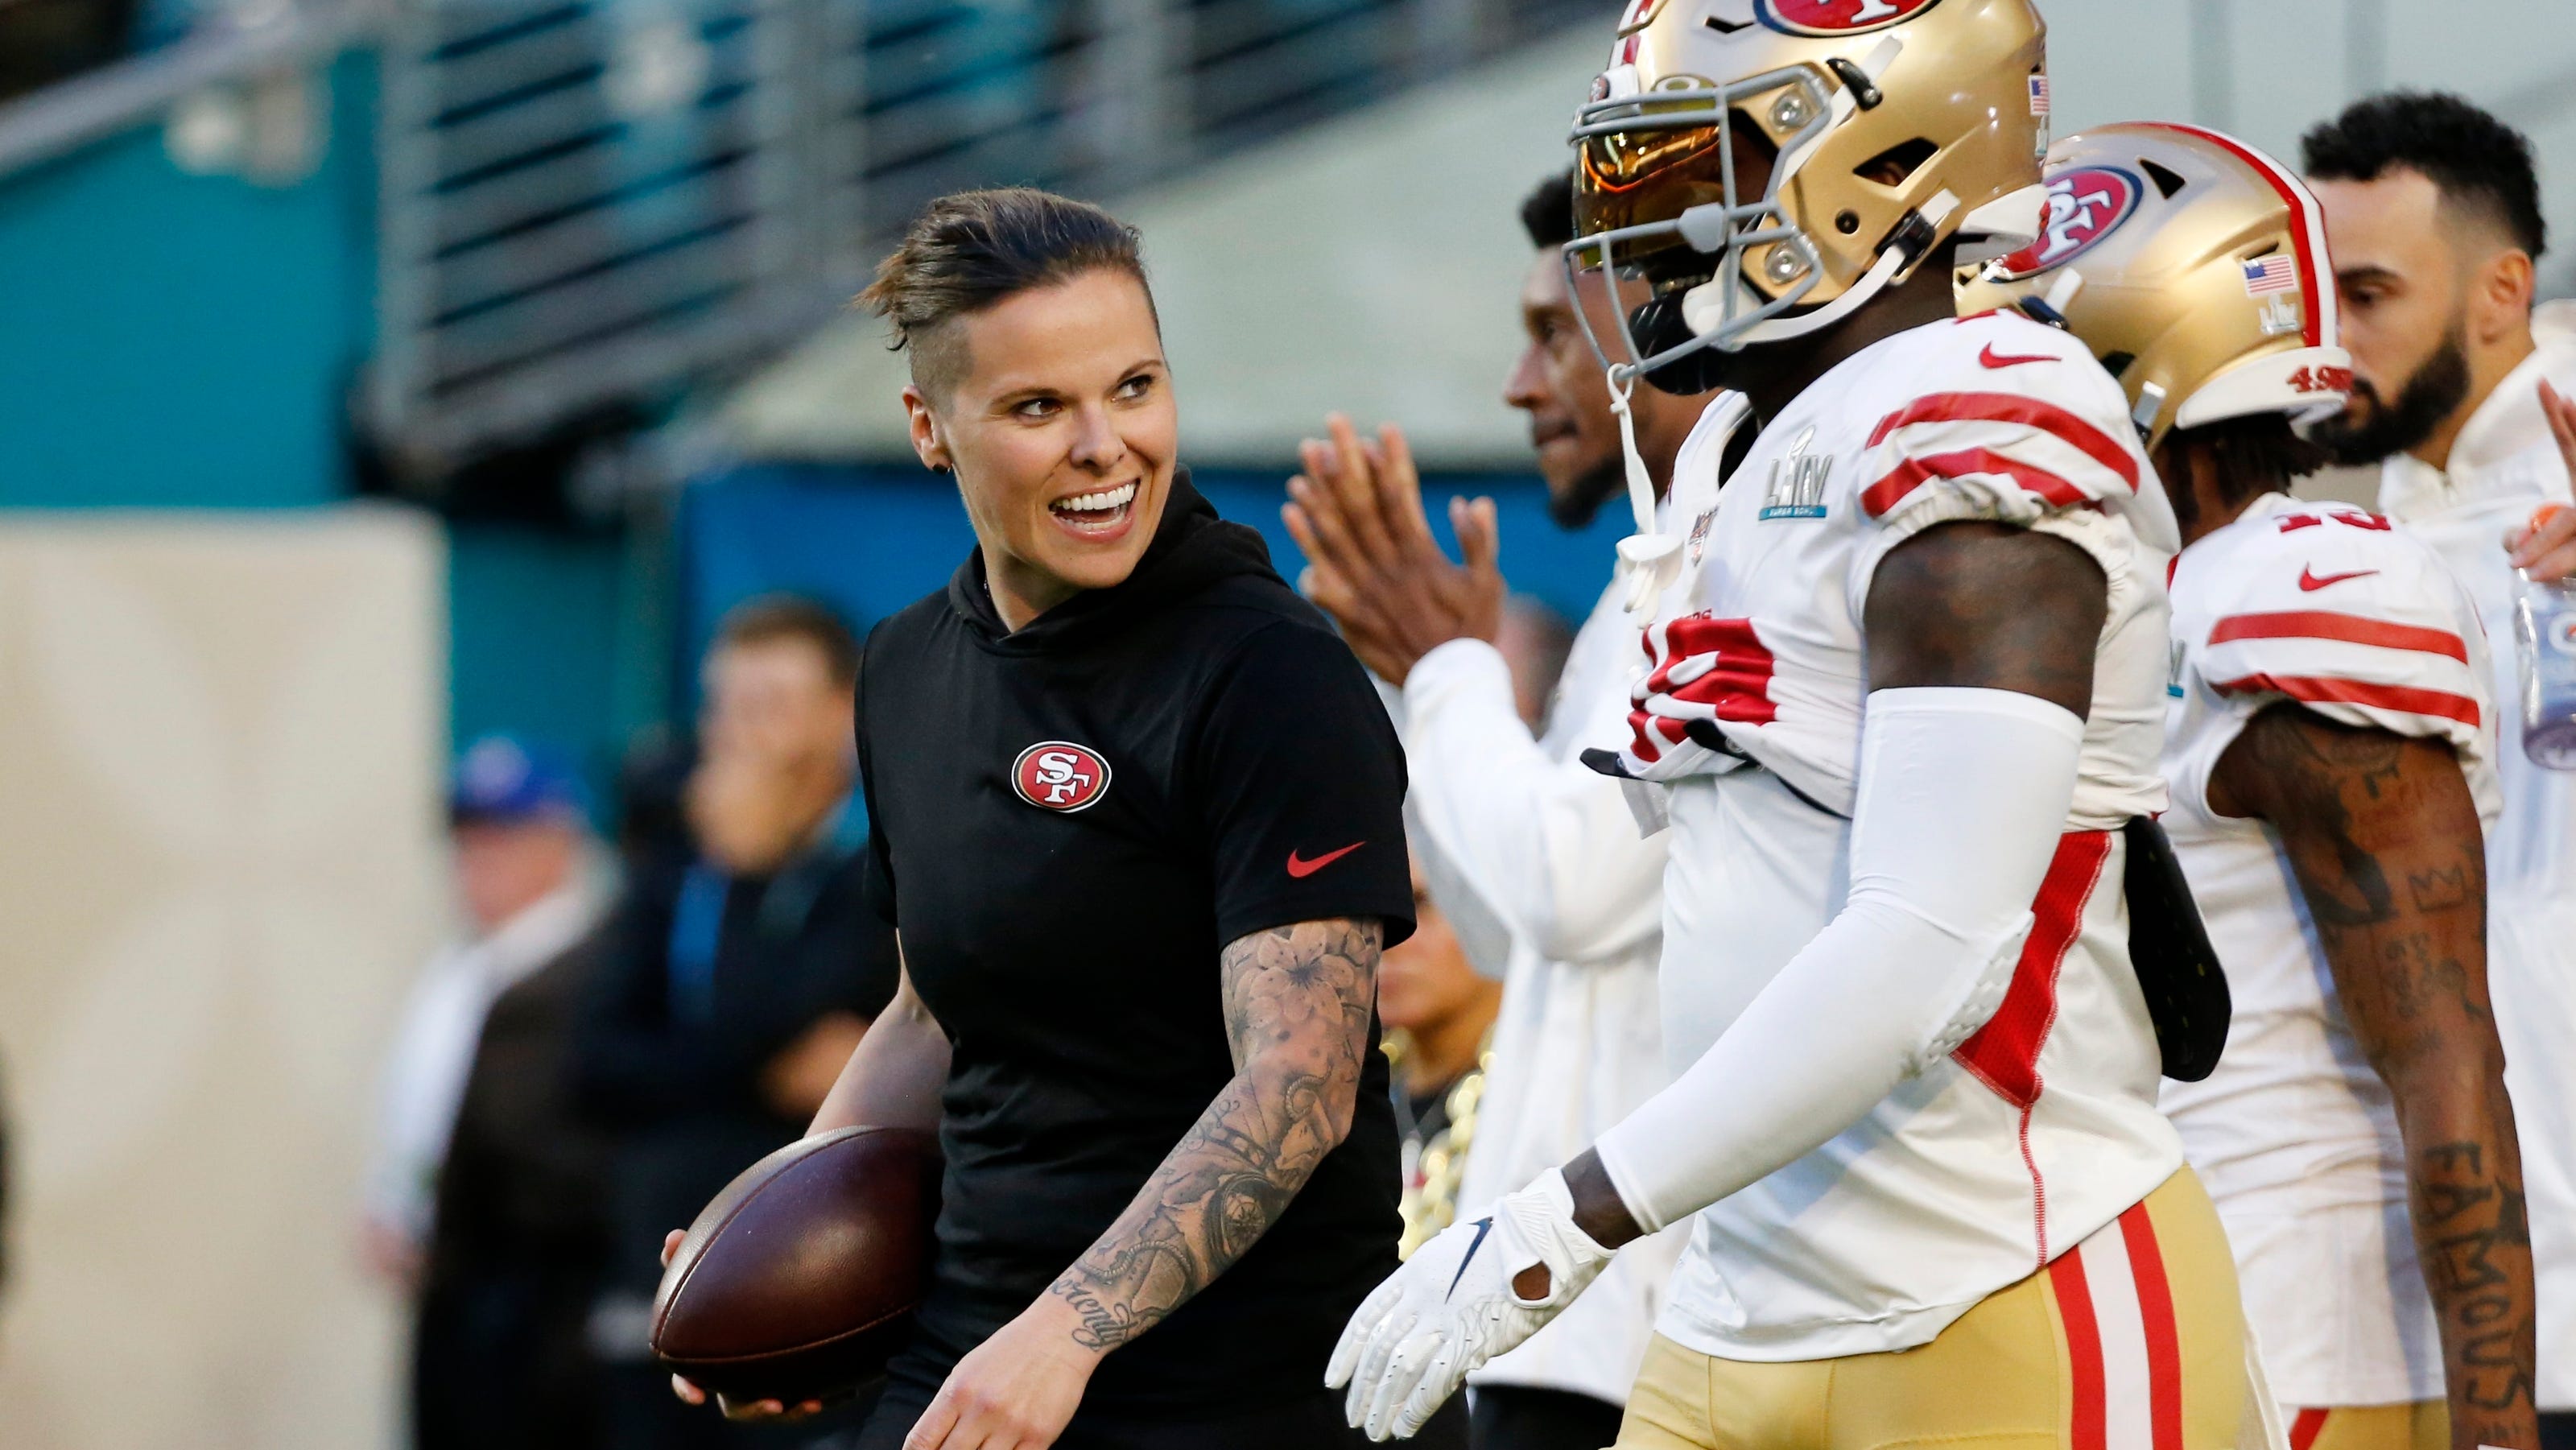 Katie Sowers makes history as 1st woman coach at Super Bowl.